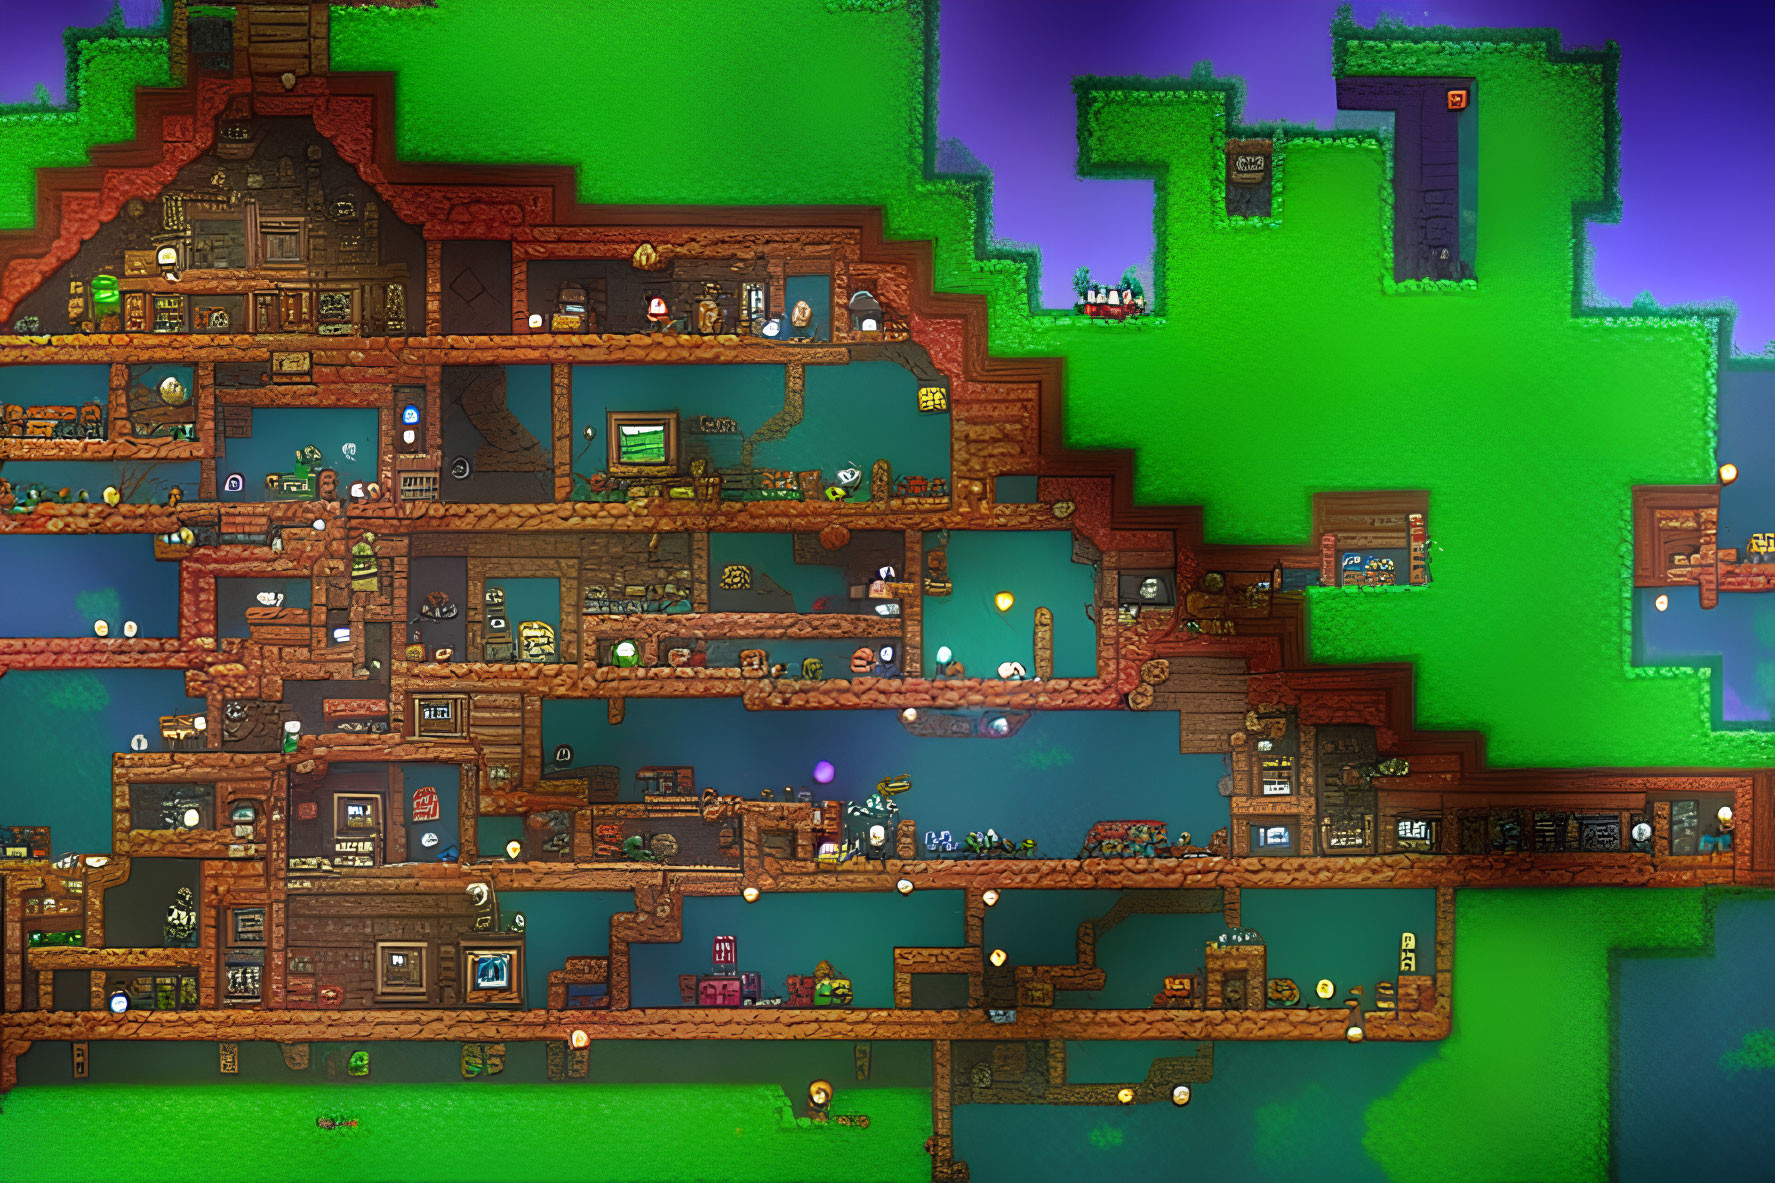 Detailed Pixel Art: Intricate Treehouse with Multiple Rooms, Platforms, and Furnishings in L